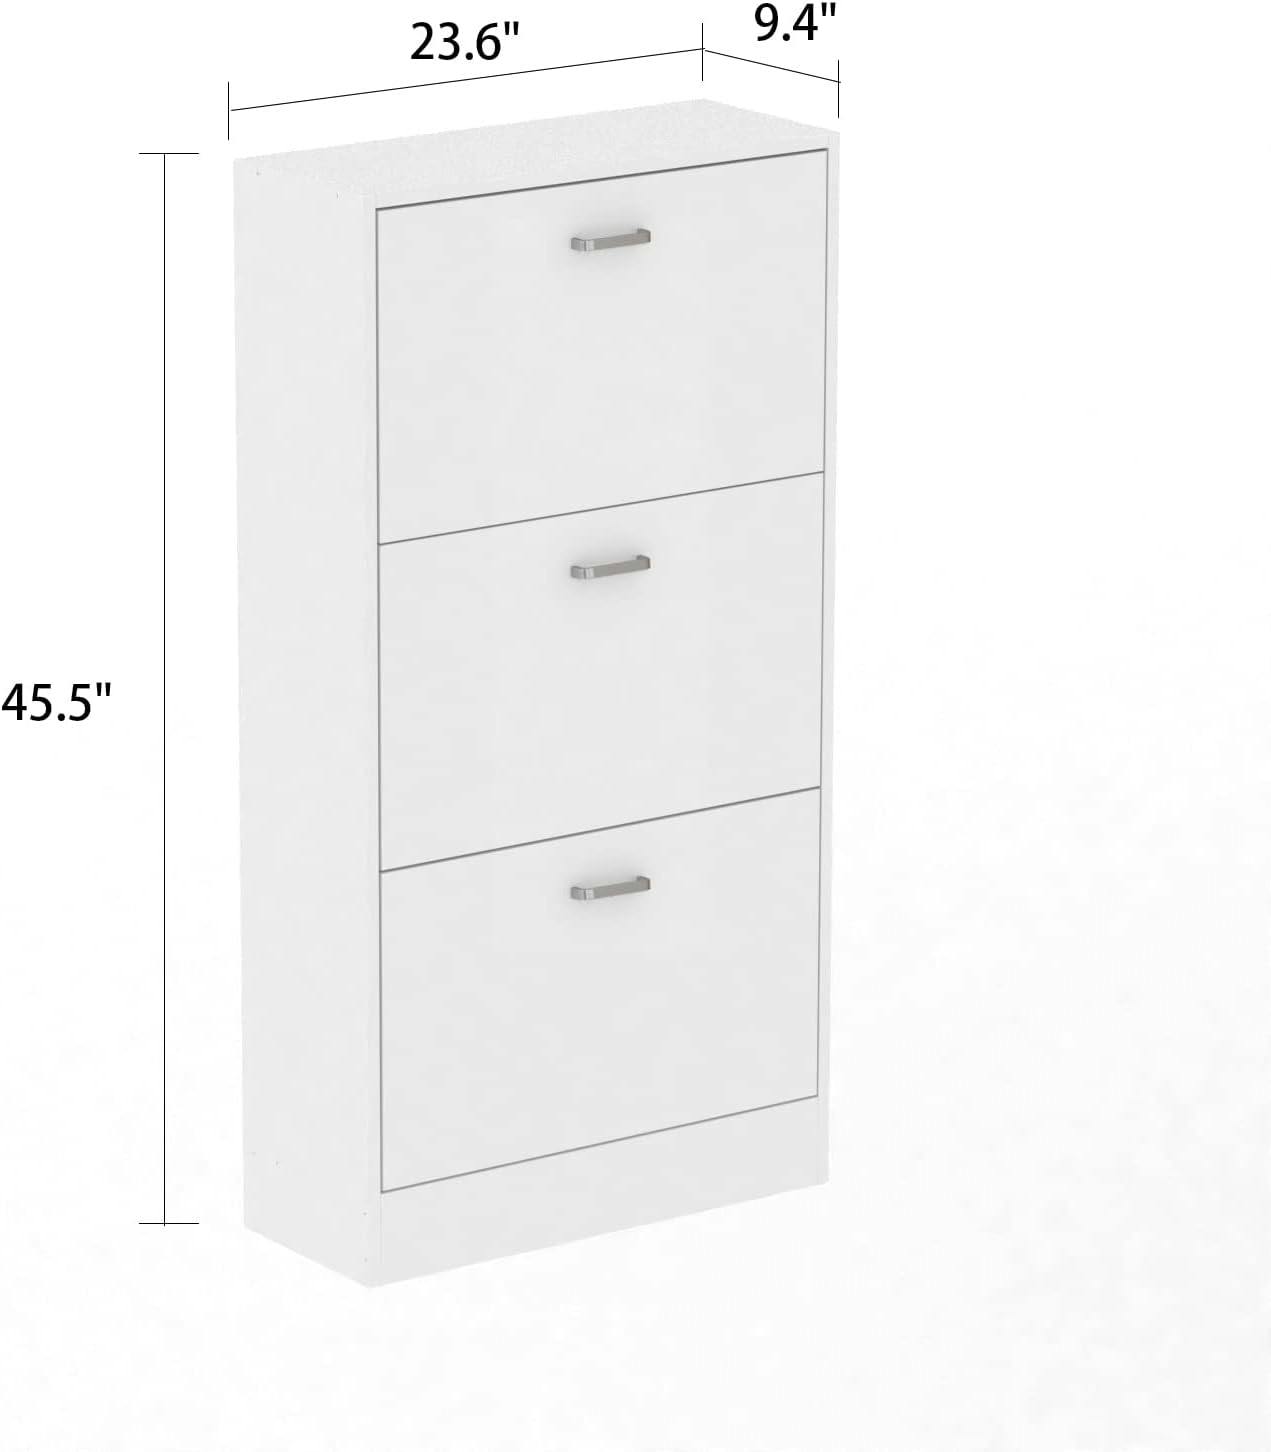 Elegant Freestanding 3-Tier Shoe Cabinet with Pull-Down Drawers, White